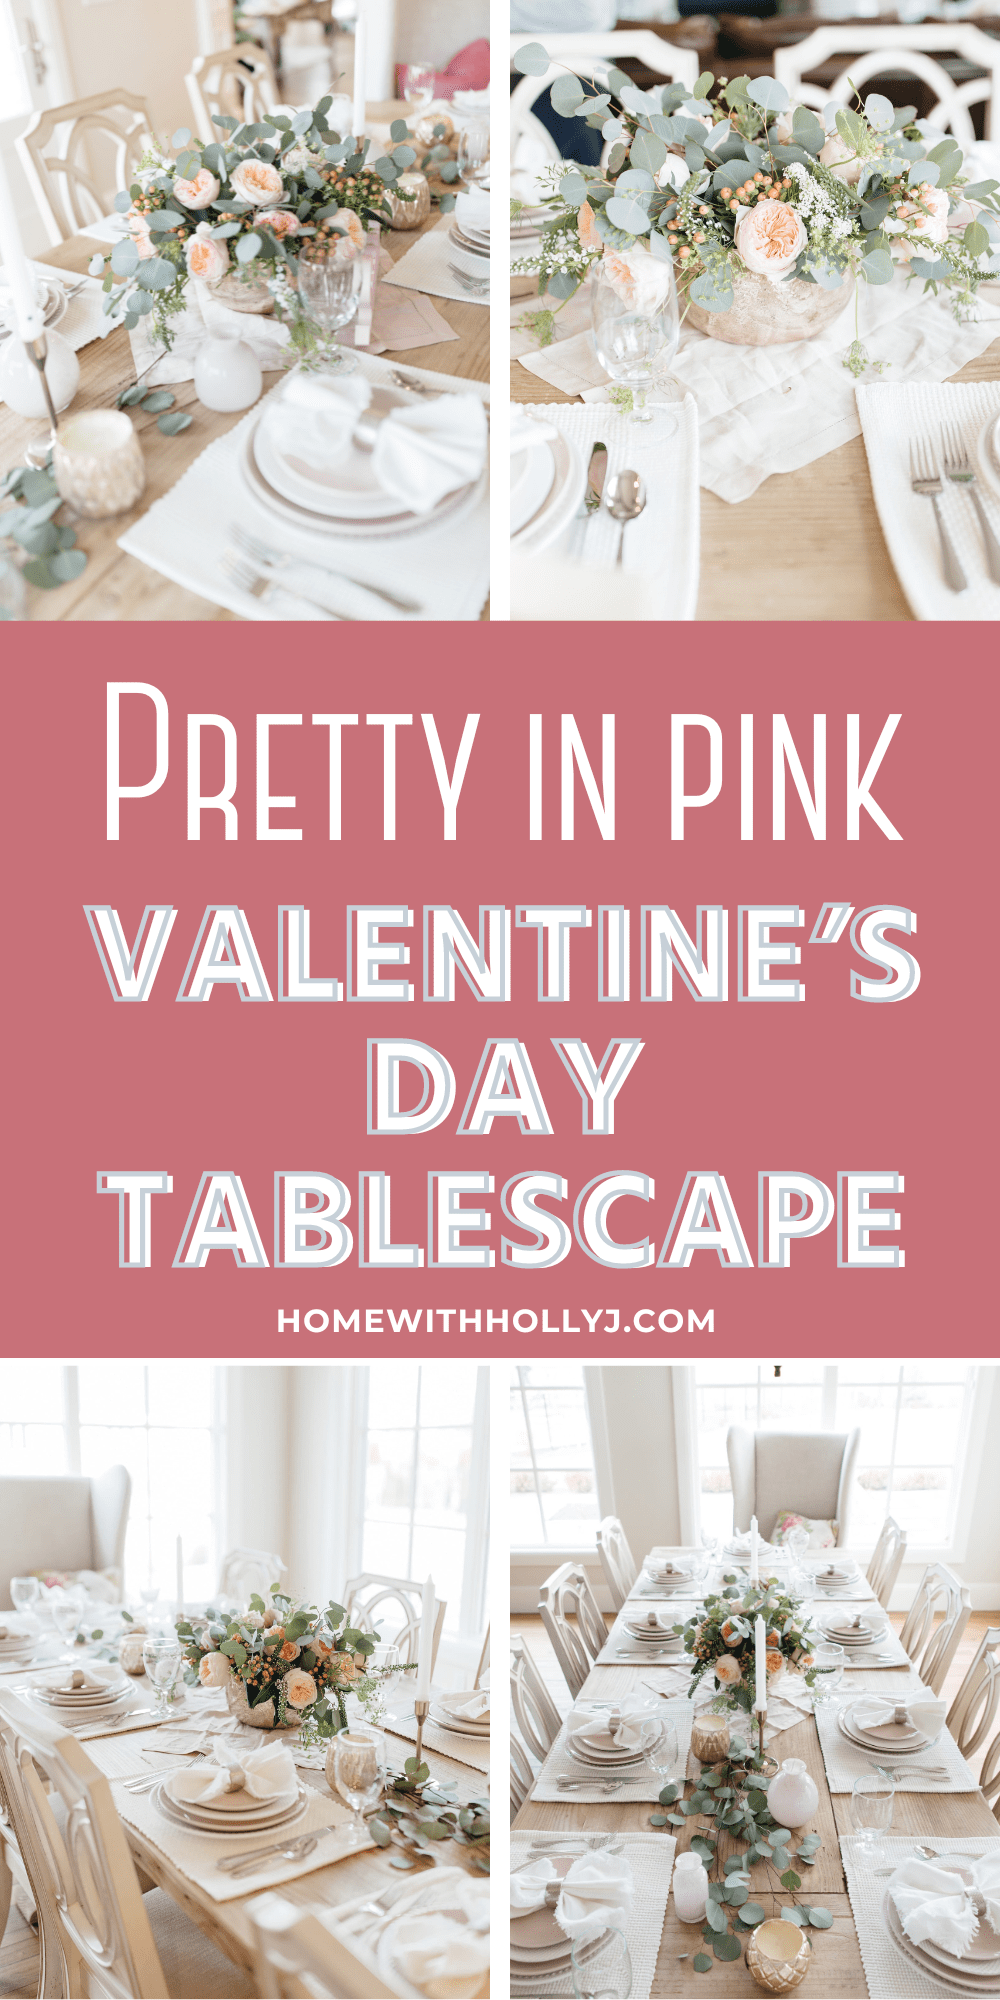 Sharing how to create a pretty Pink and white Valentines Tablescape for Valentines Day. Pink and White dinnerware with fresh flowers.